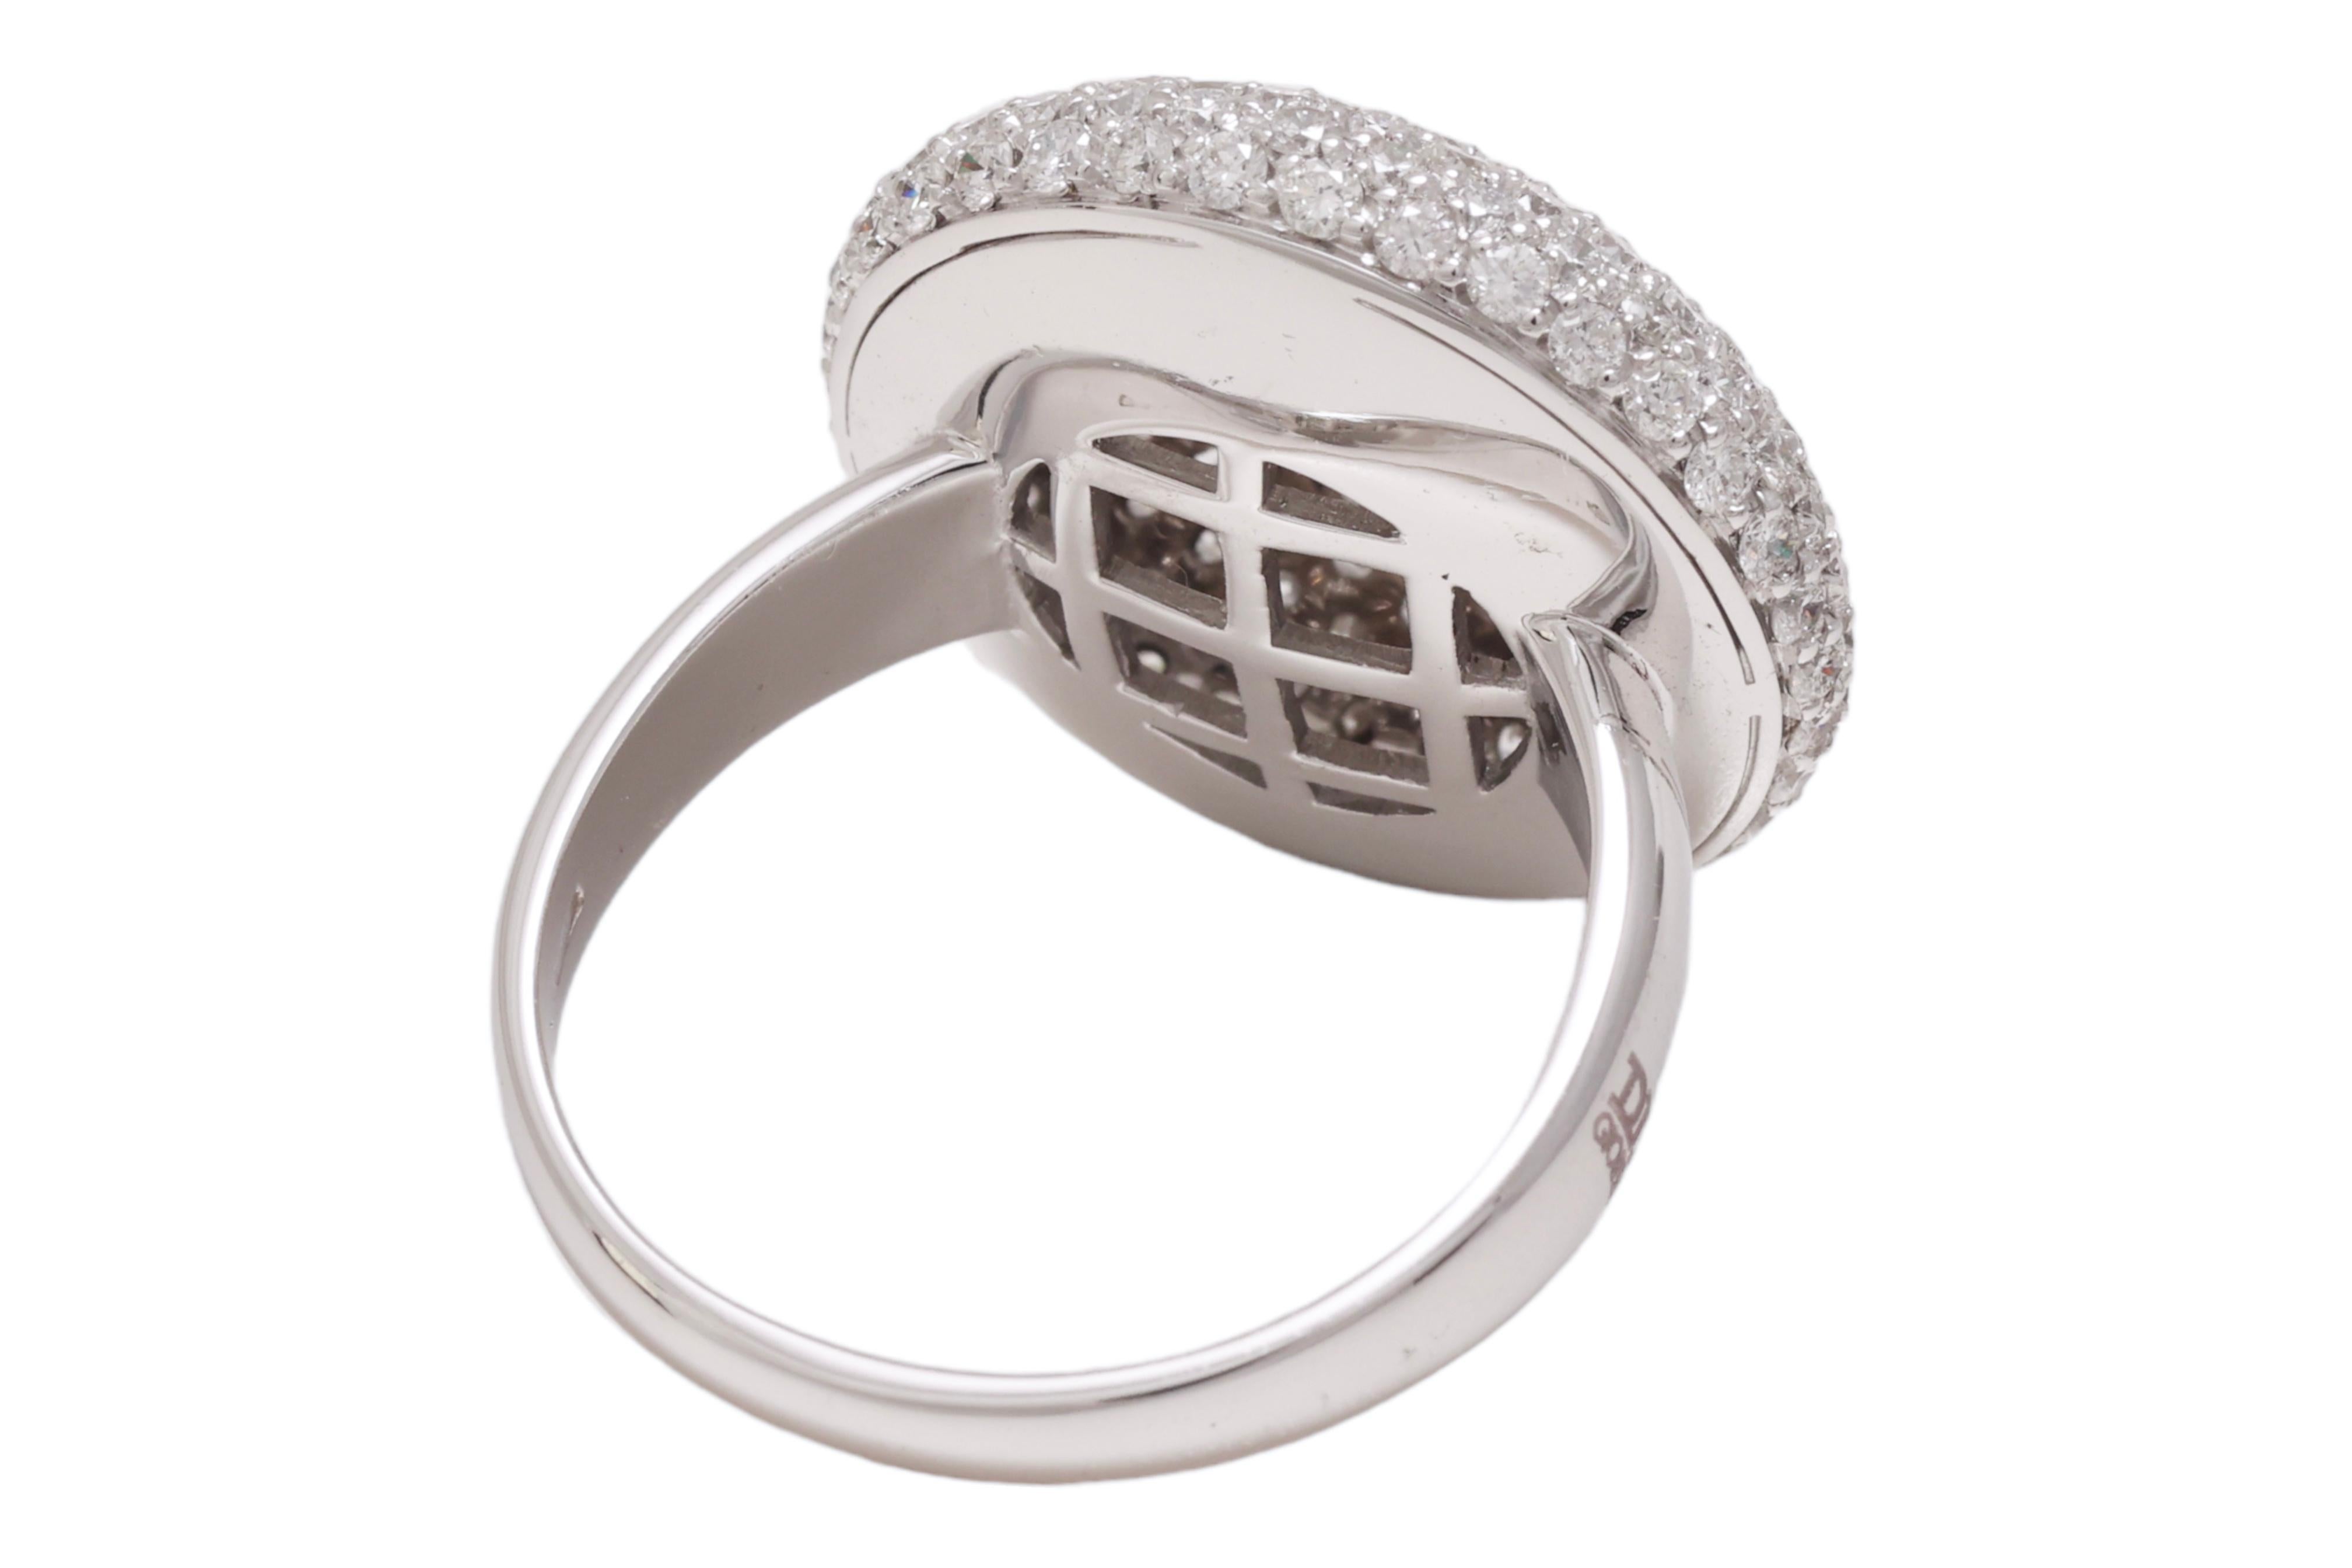  18 kt. White Gold Ring with 2.6 ct. Diamonds  For Sale 2